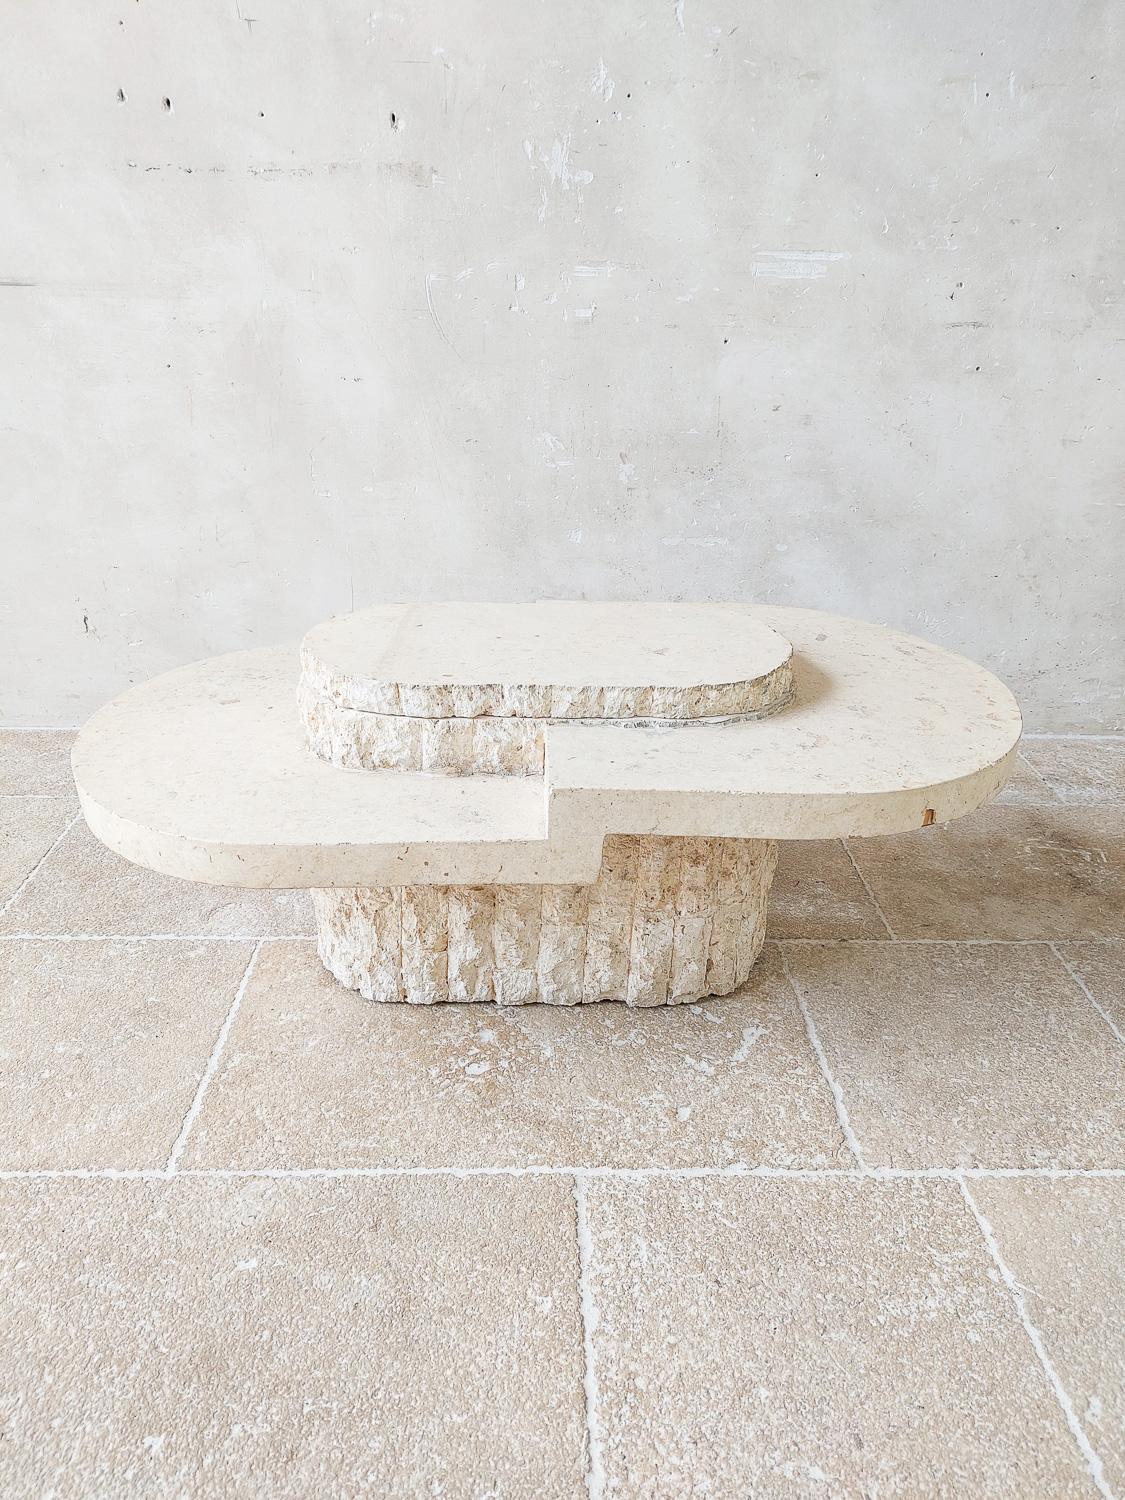 Vintage Magnussen Ponte cocktail table with travertine veneer and inside 3 bottle holders, 1970s, Hollywood Regency.

This cocktail table or coffee table has an oval kind of shape, with in the middle a faux tree trunk feature with 3 surfaces of